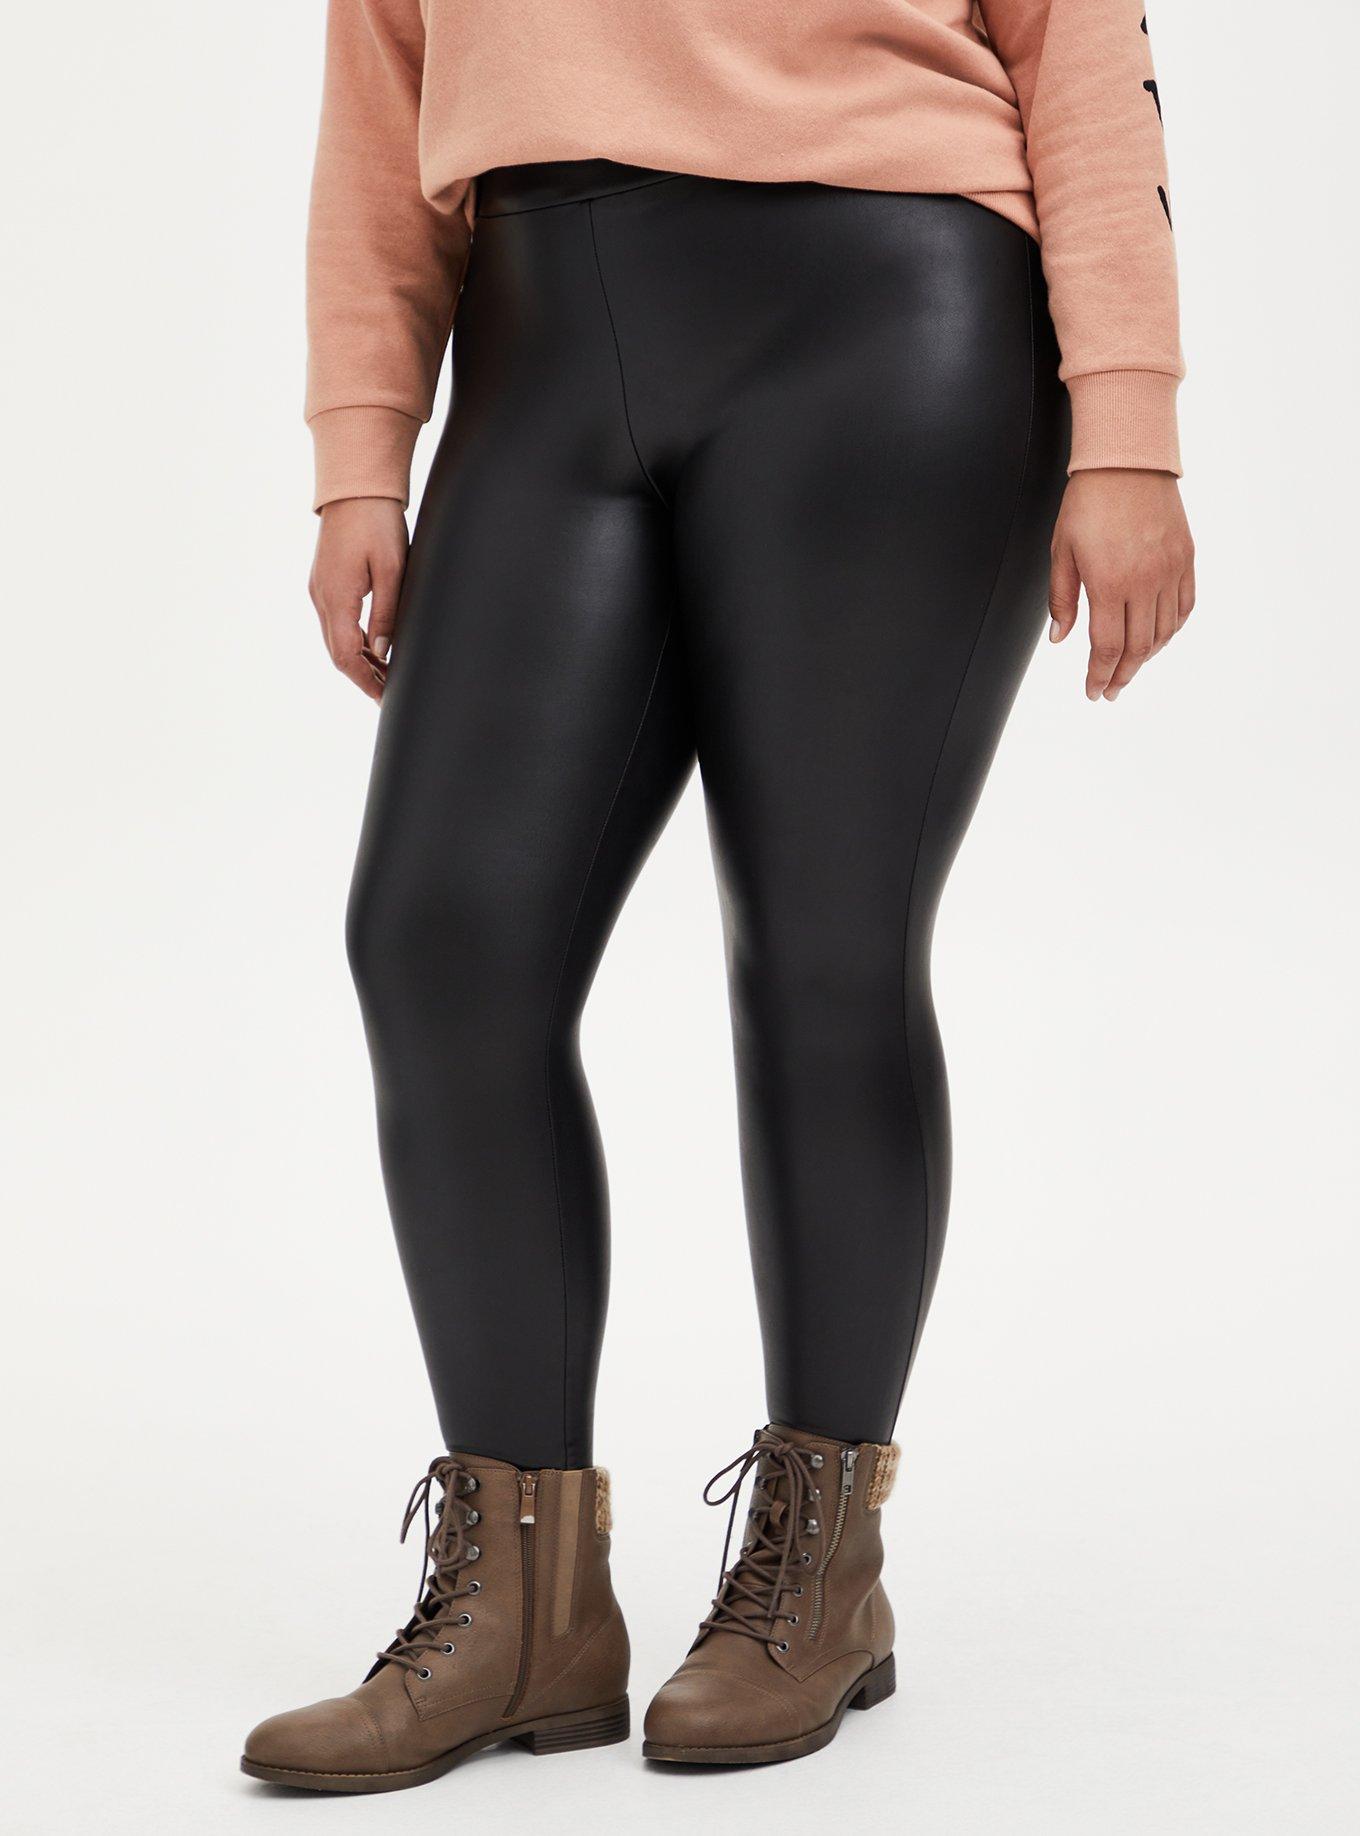 Torrid Full Length Faux Leather Leggings Size 3X - $21 - From Maria